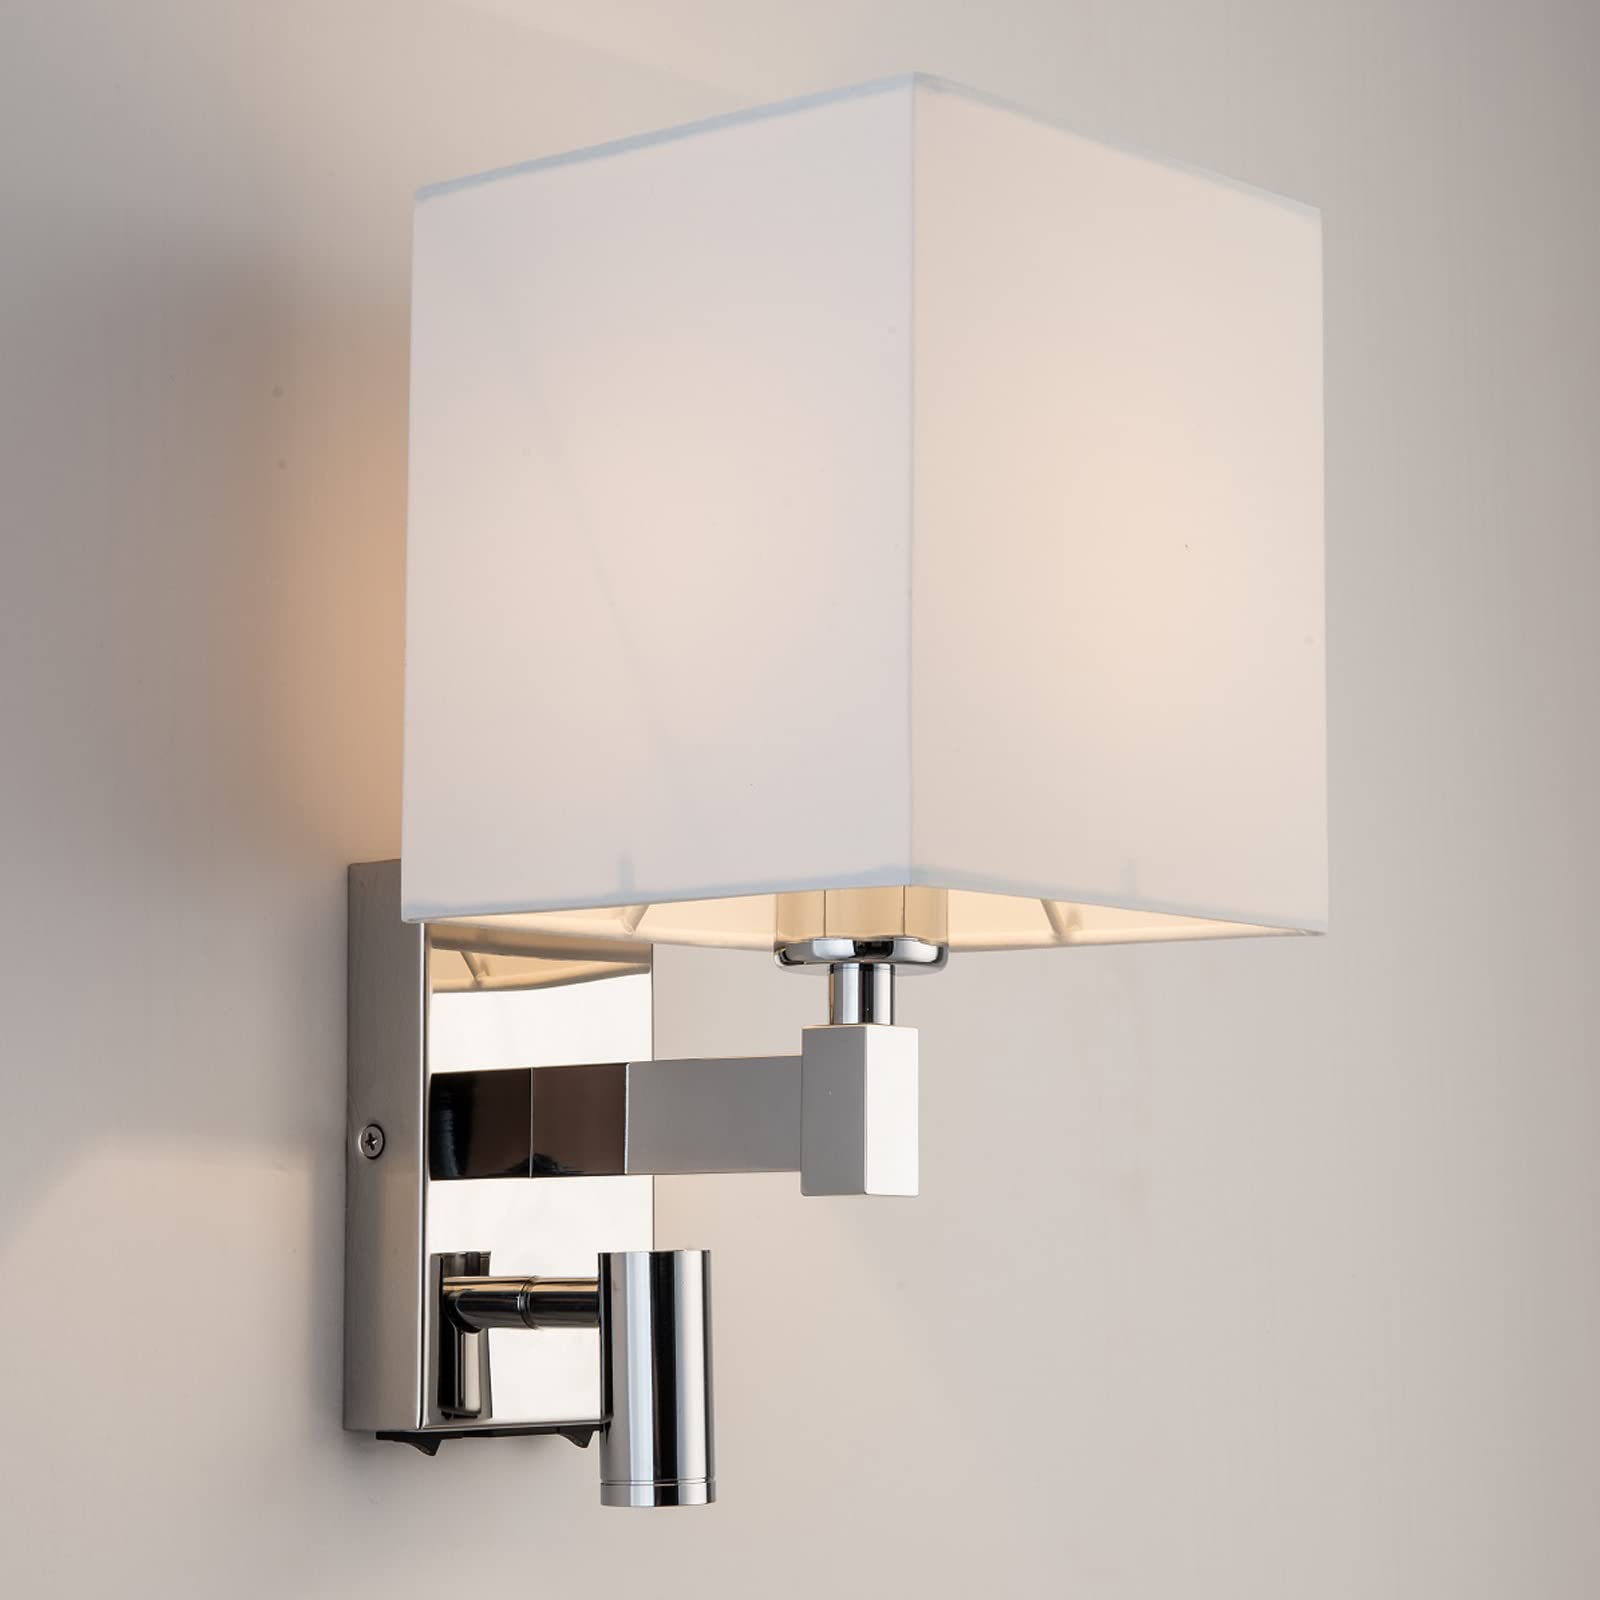 HARPER LIVING 1xE27/ES Up Down Wall Light with Adjustable LED Reading Light, 1 USB Port and 2 On/Off Switches, Polished Chrome Finish, White Fabric Shade (Square Shade)